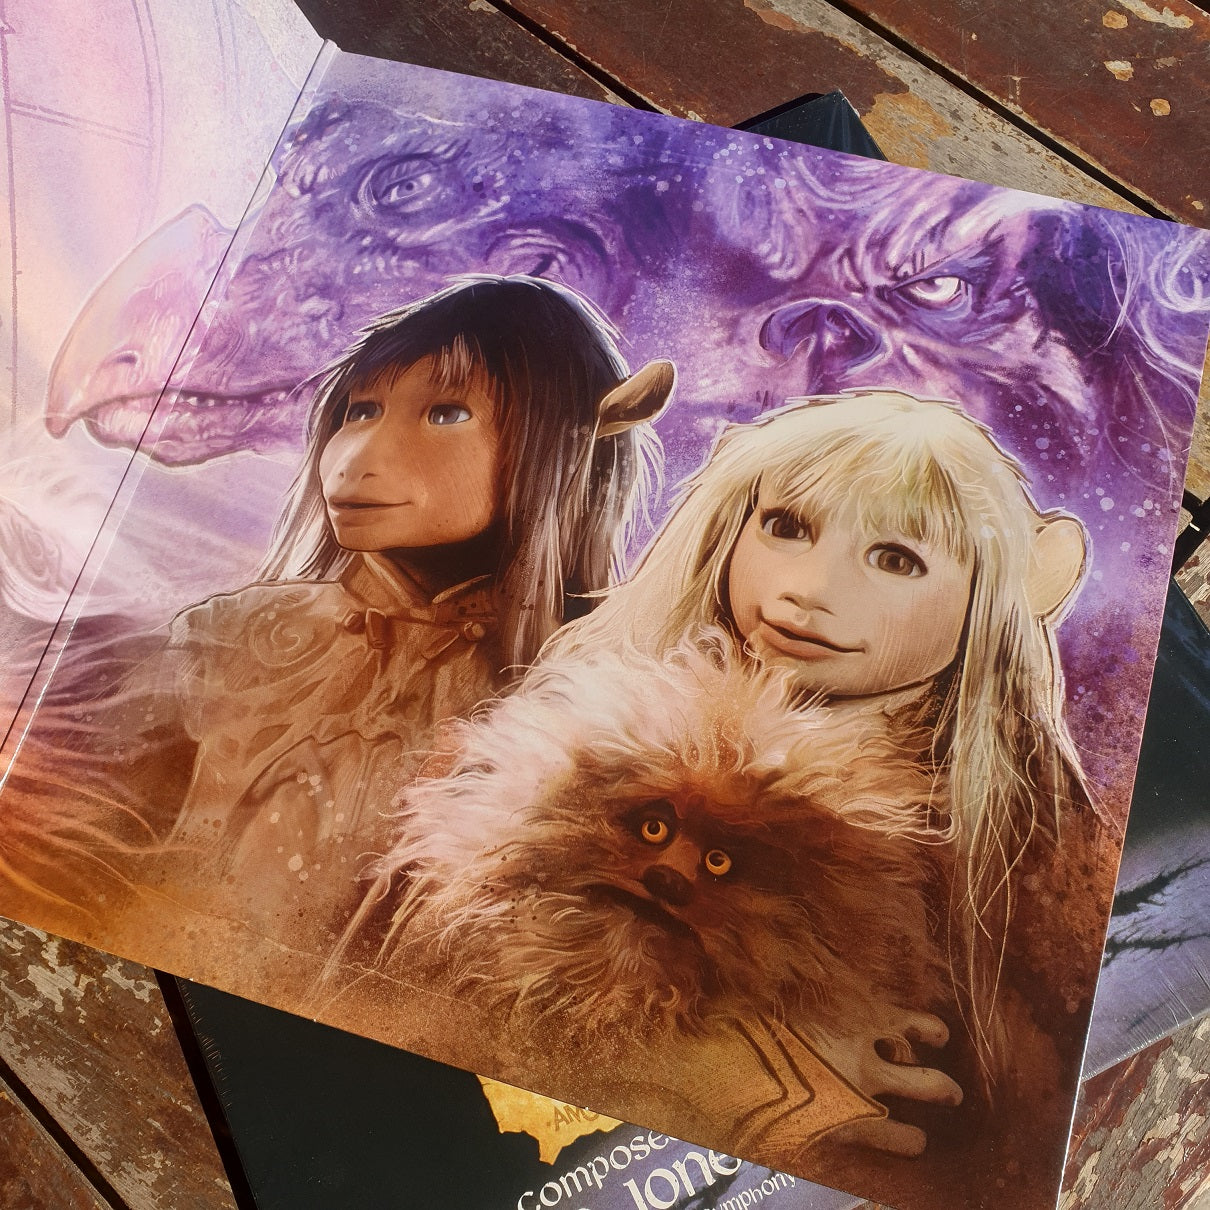 NEW - Soundtrack, The Dark Crystal OST Coloured LP